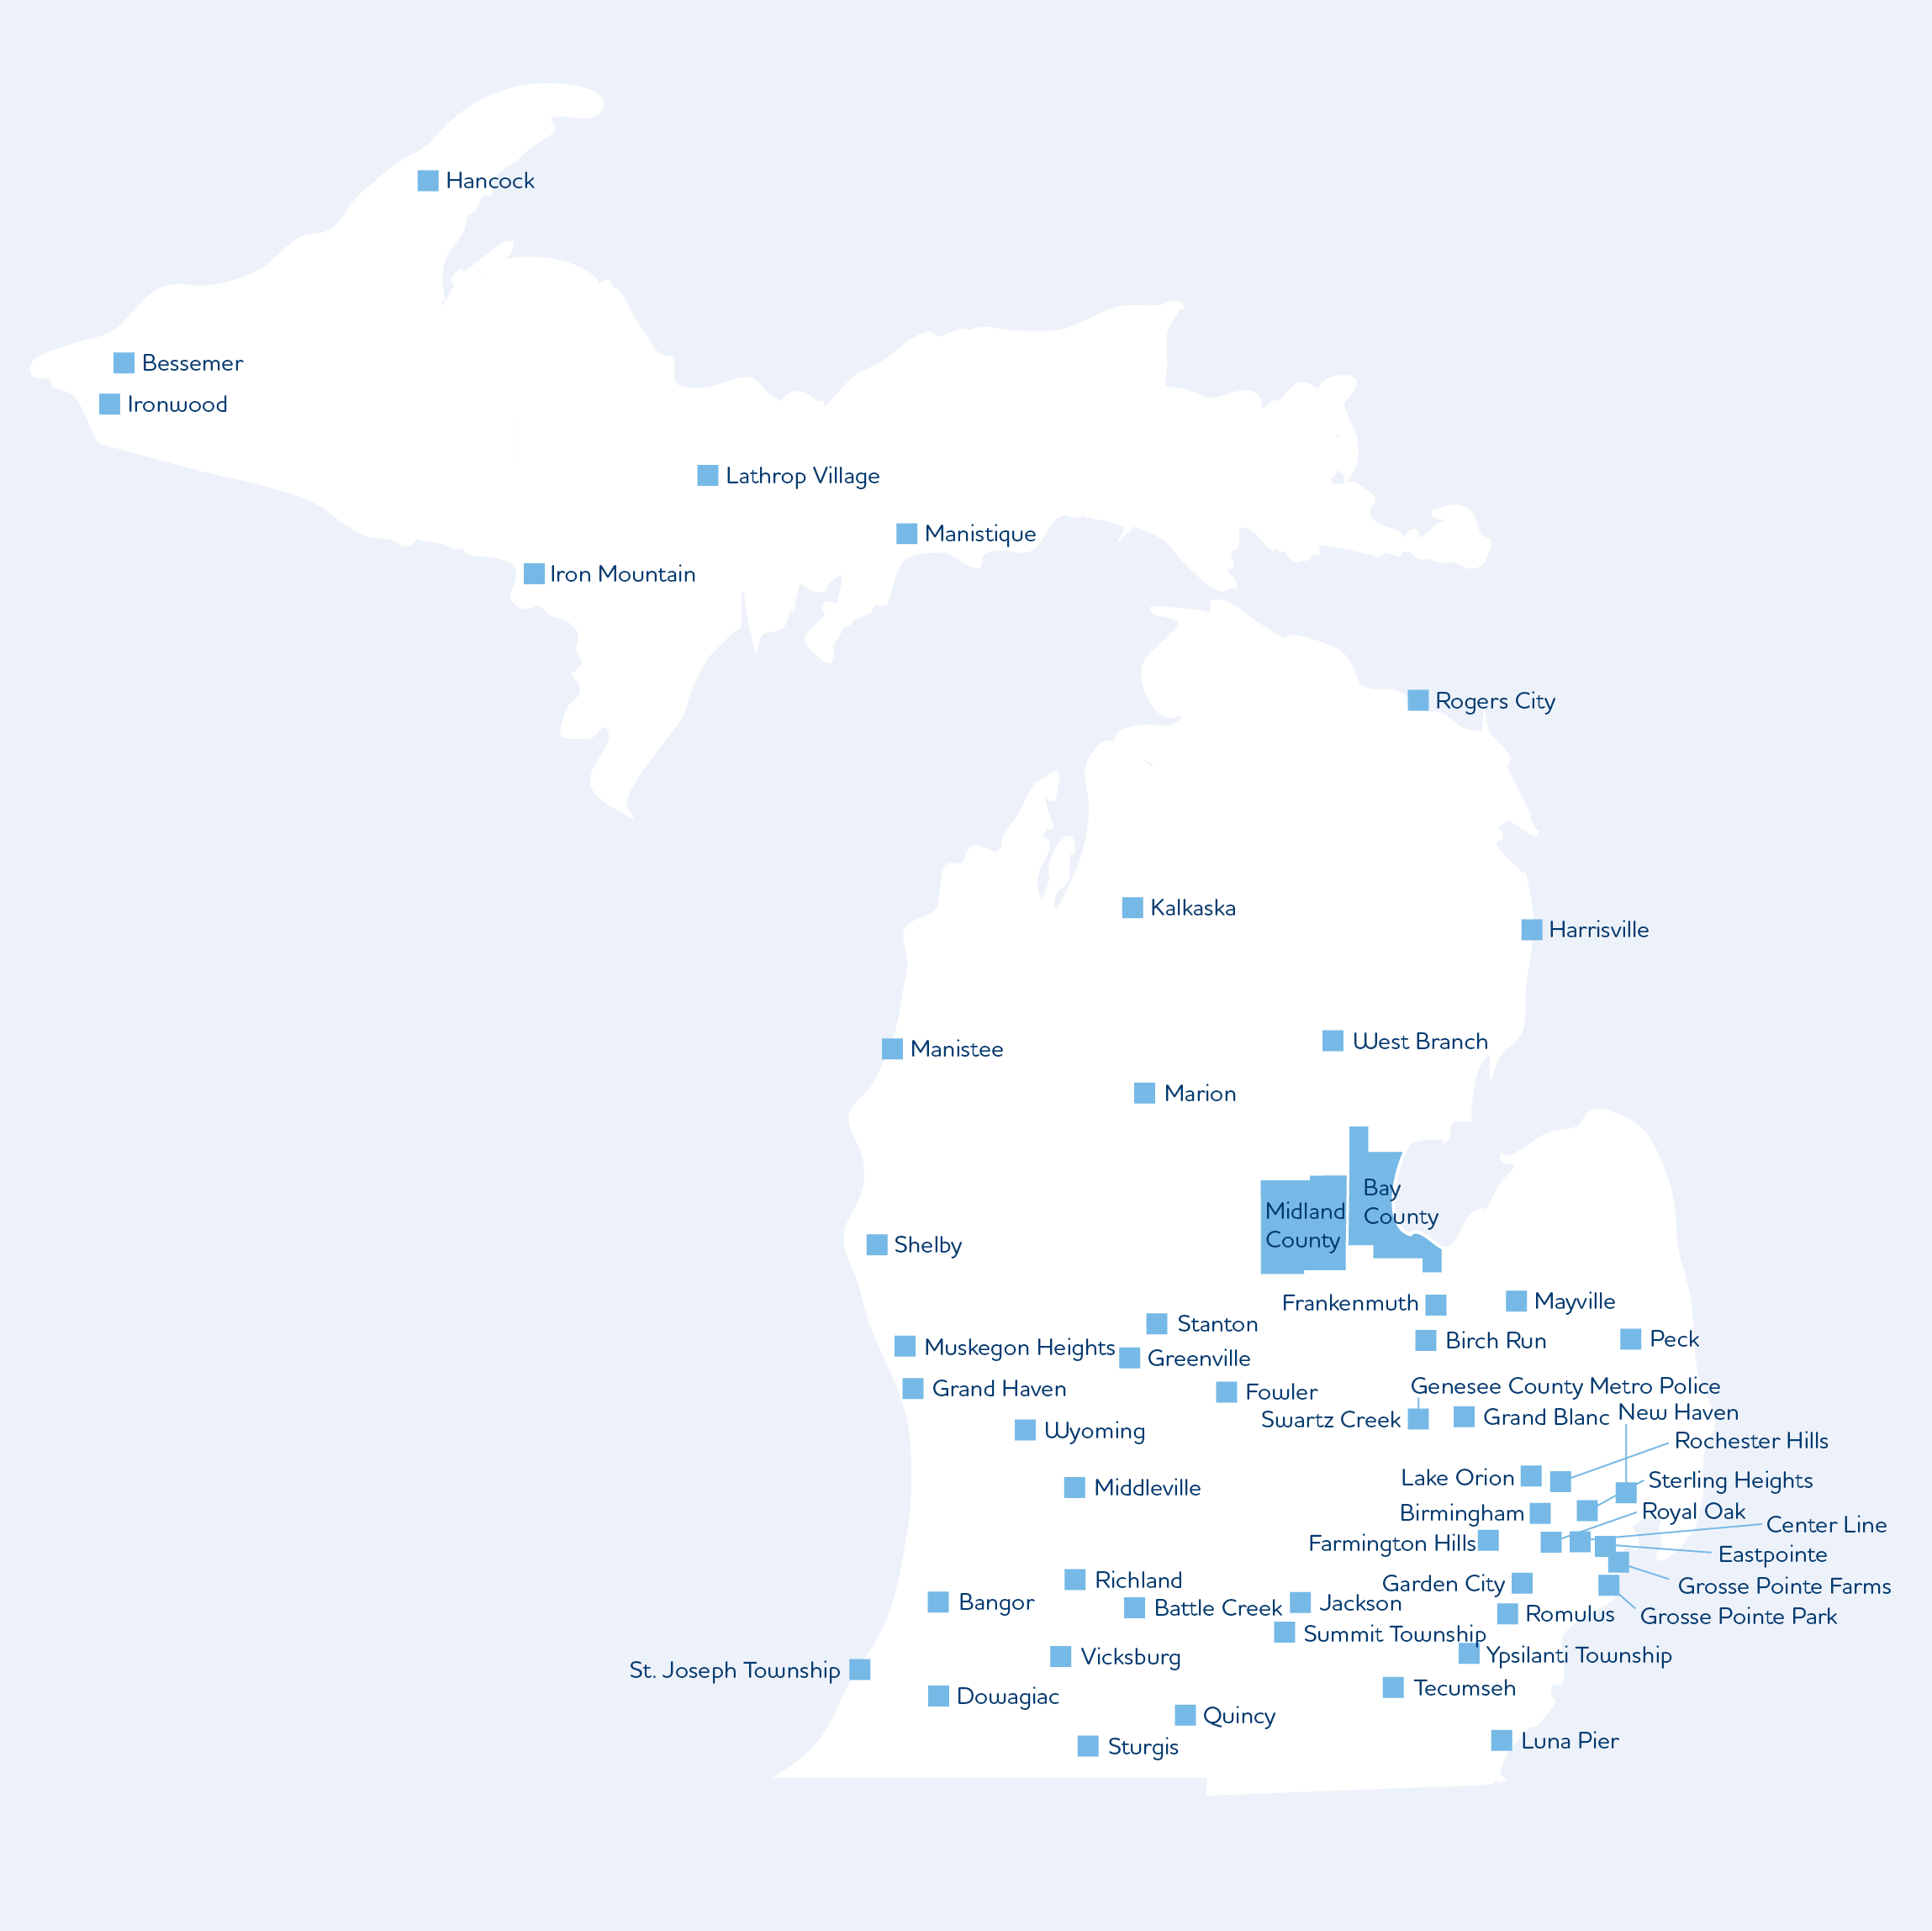 Map of Michigan highlighting the communities that utilized the ServeMICity program.